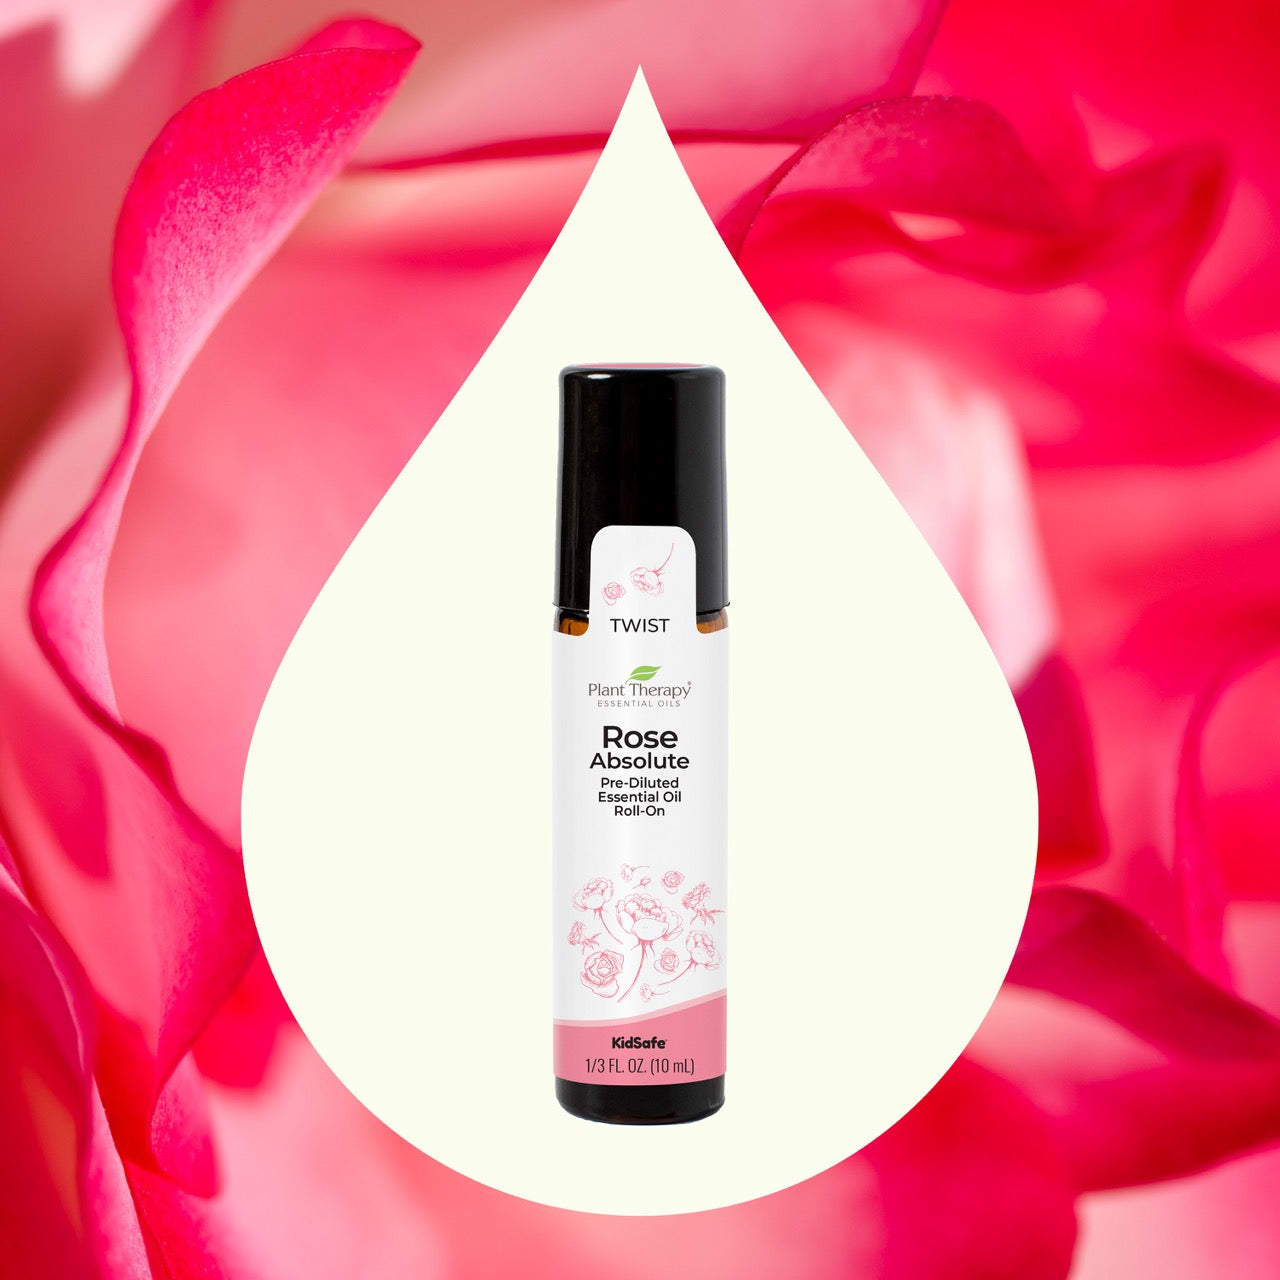 Rose Essential Oil Pre-Diluted Roll-On key ingredient image